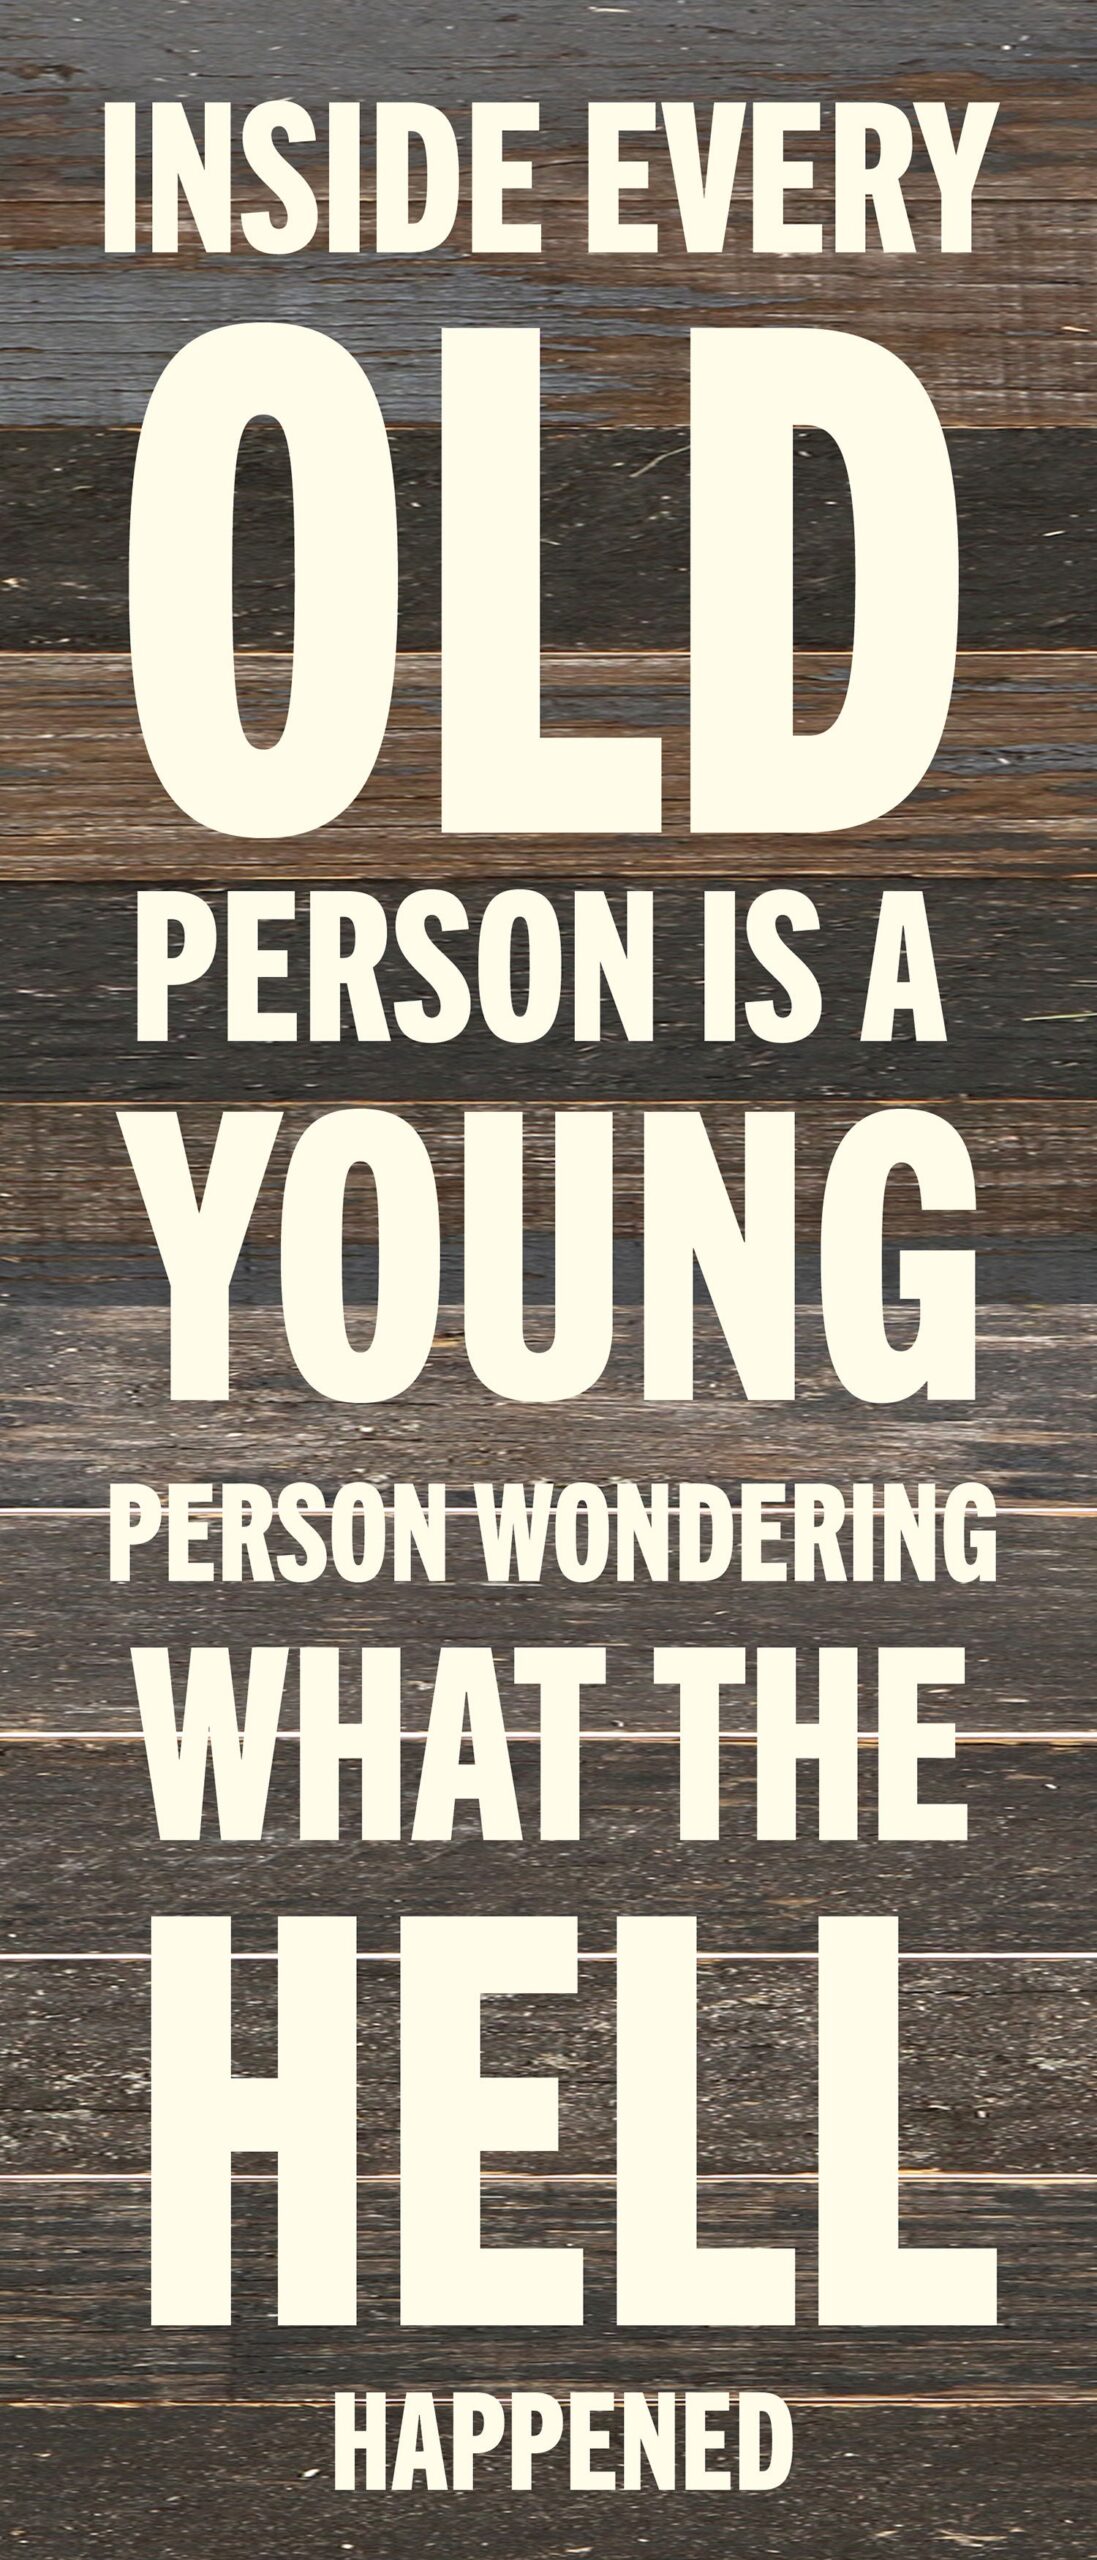 Inside every old person is a young person wondering what the hell happened / 6x14 Reclaimed Wood Wall Decor